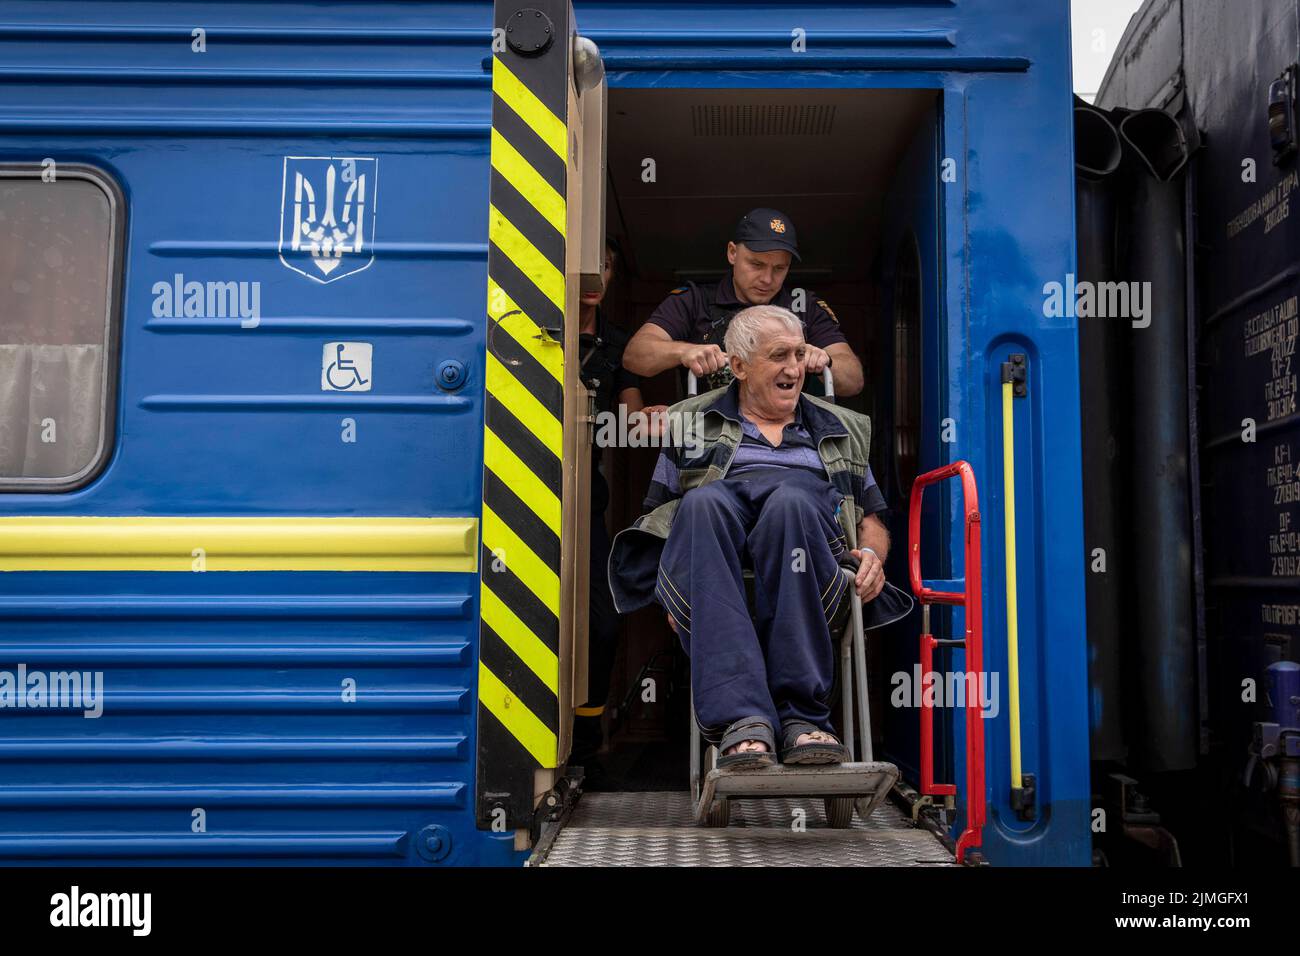 A police officer assists an old man in a wheelchair to board the evacuation train at Pokorvsk Train Station, Donetsk. Amid the intensified fighting in the Eastern part of Ukraine, east Ukraine is now intensifying its civilian evacuation, as millions of Ukrainian families have been evacuating from the closer and closer war, as many of them will be relocated to the western part of the country. According to the United Nations, at least 12 million people have fled their homes since Russia's invasion of Ukraine, while seven million people are displaced inside the country. Stock Photo